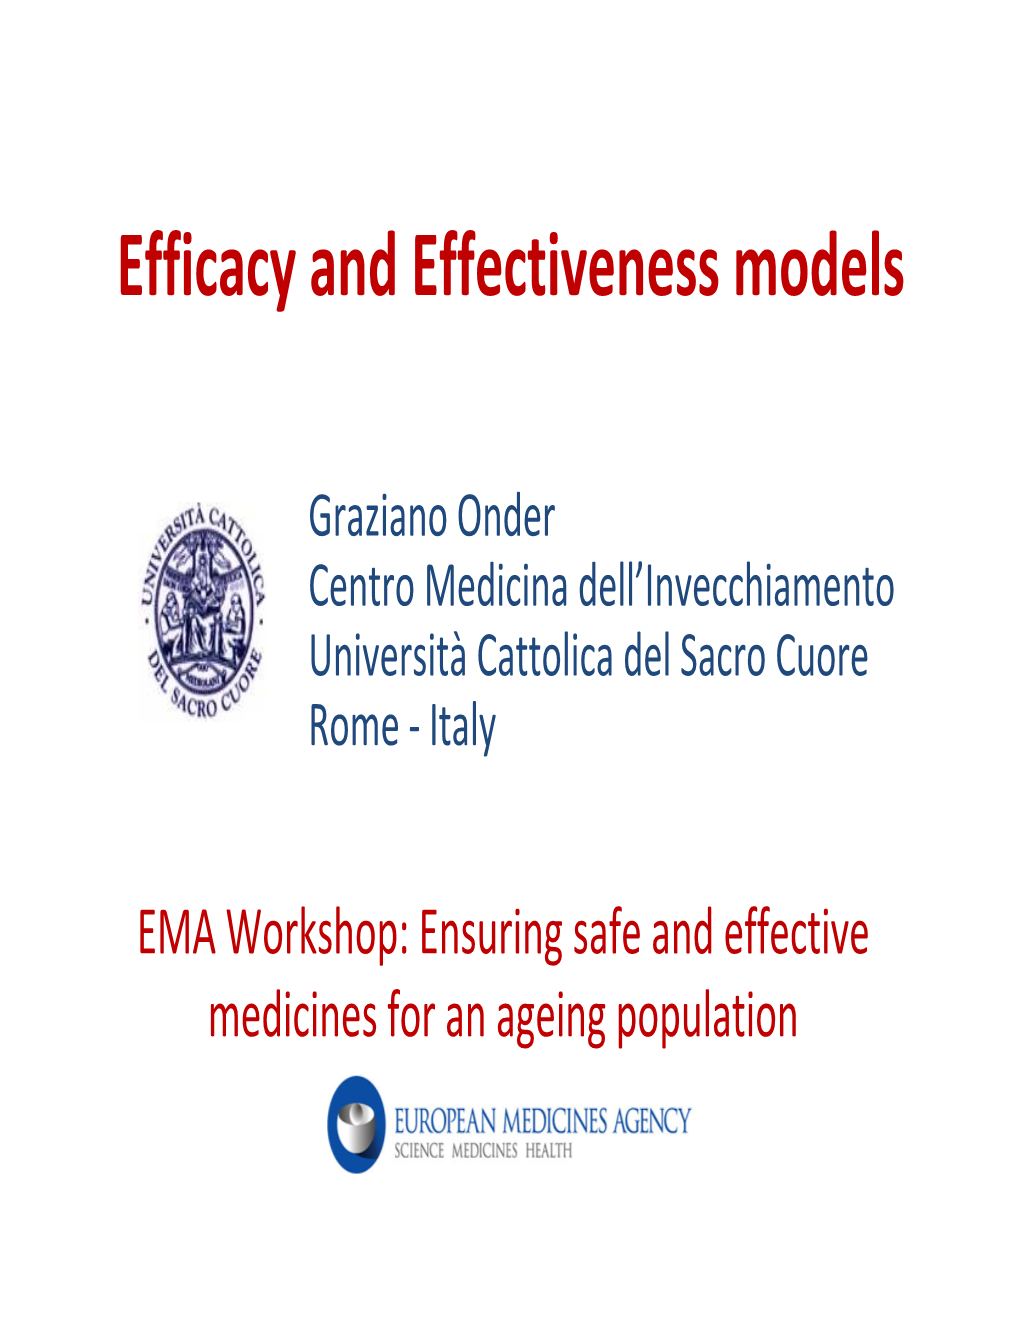 Efficacy and Effectiveness Models